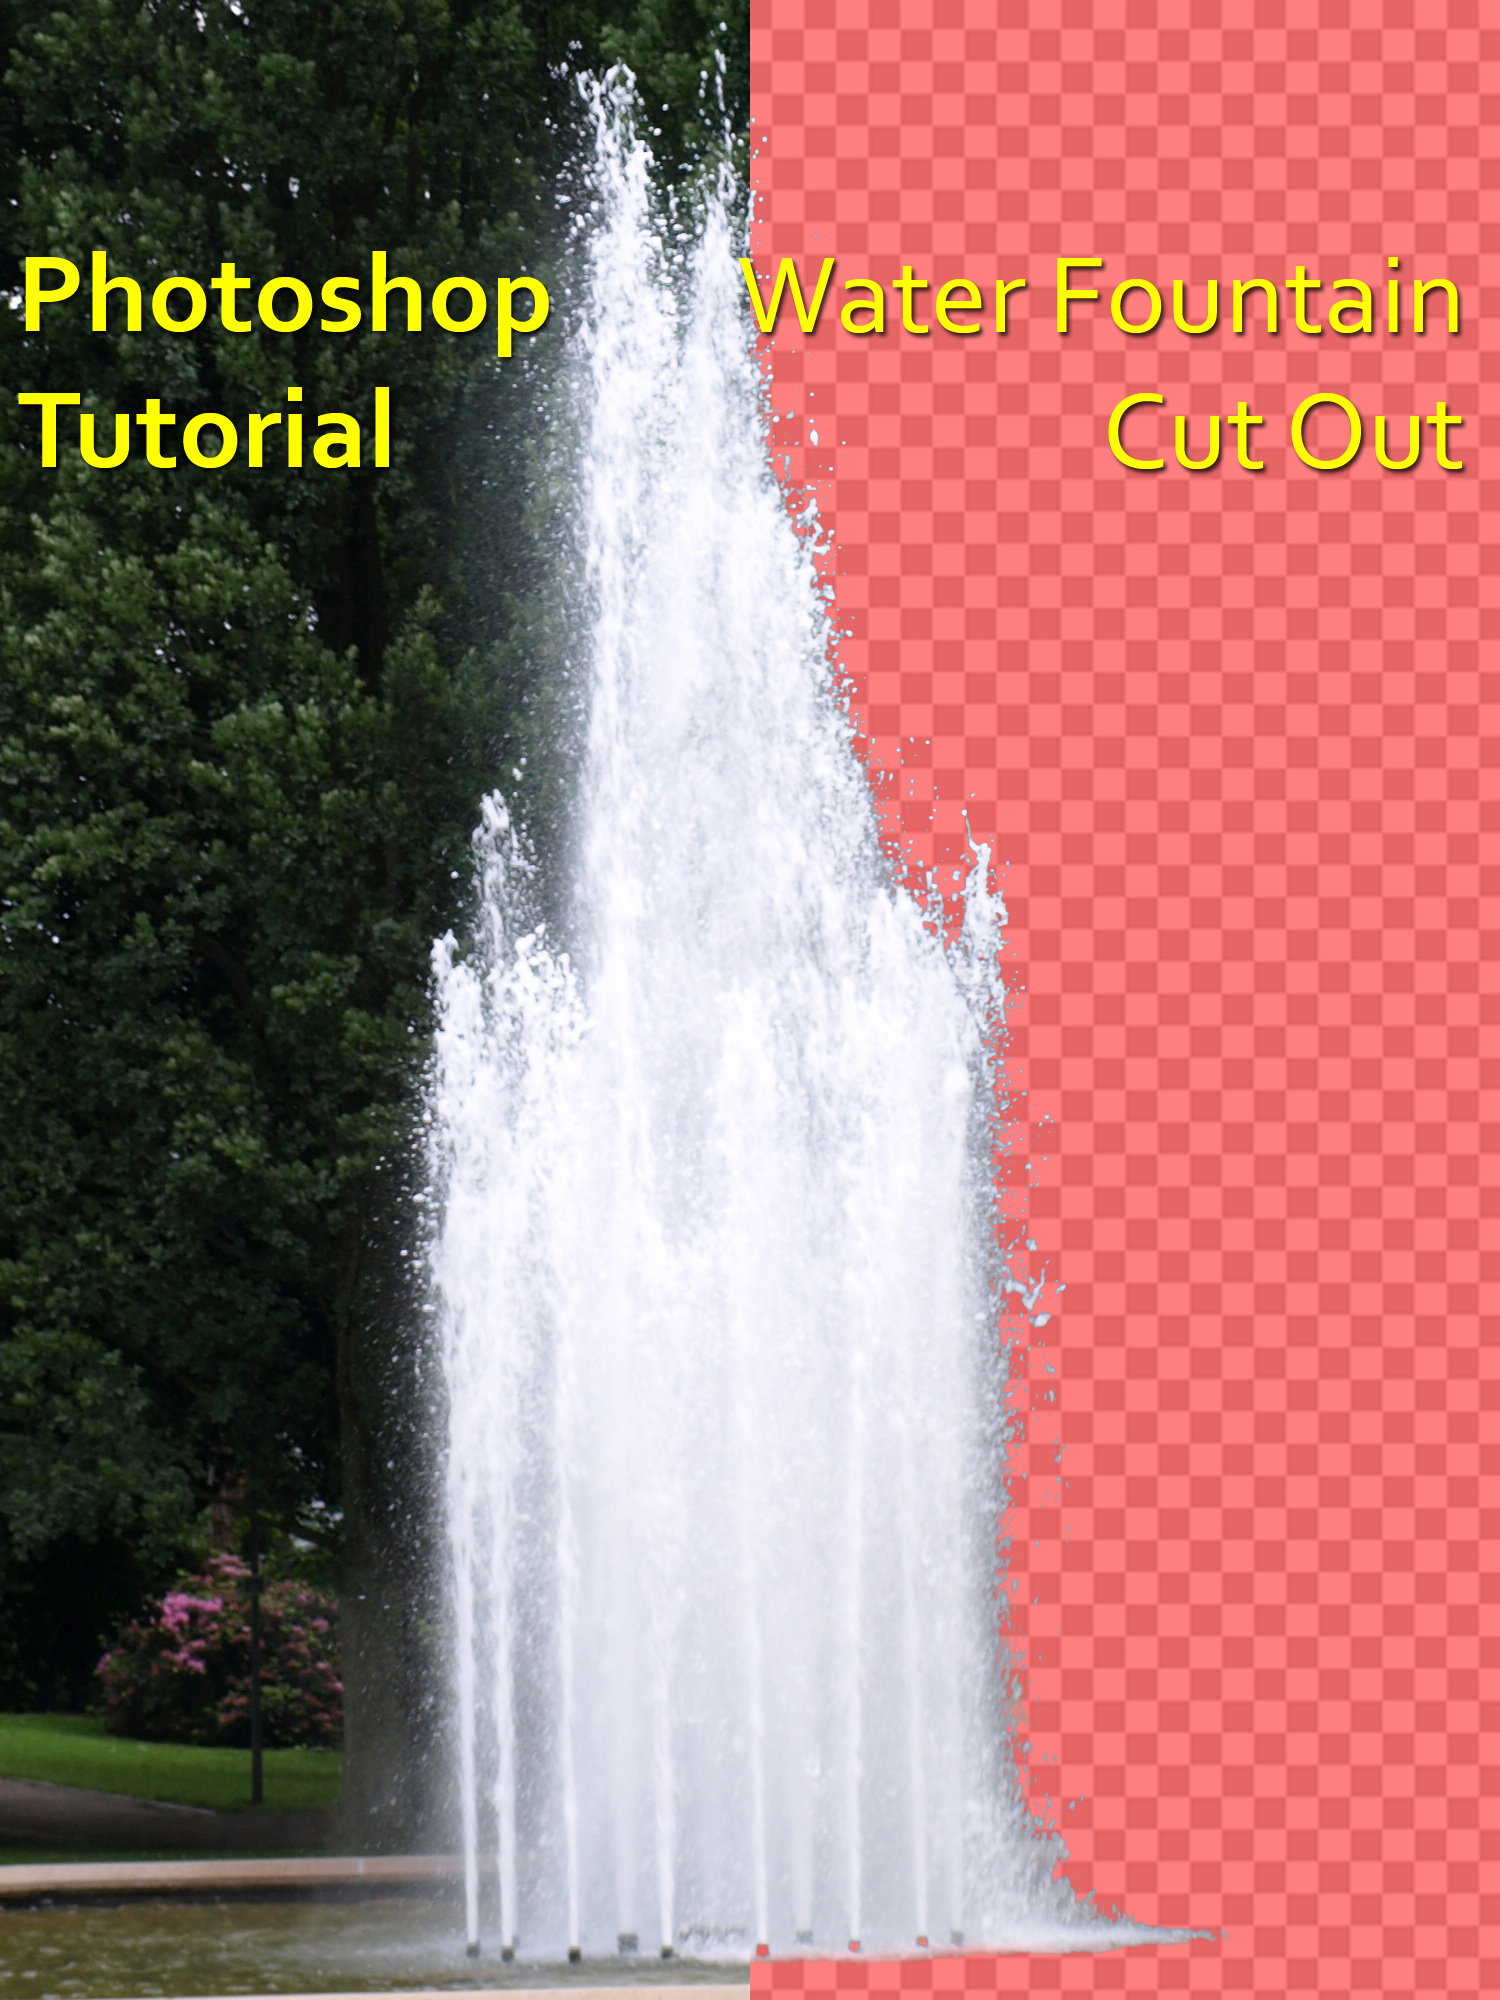 How to cut out a water fountain – Photoshop Tutorial